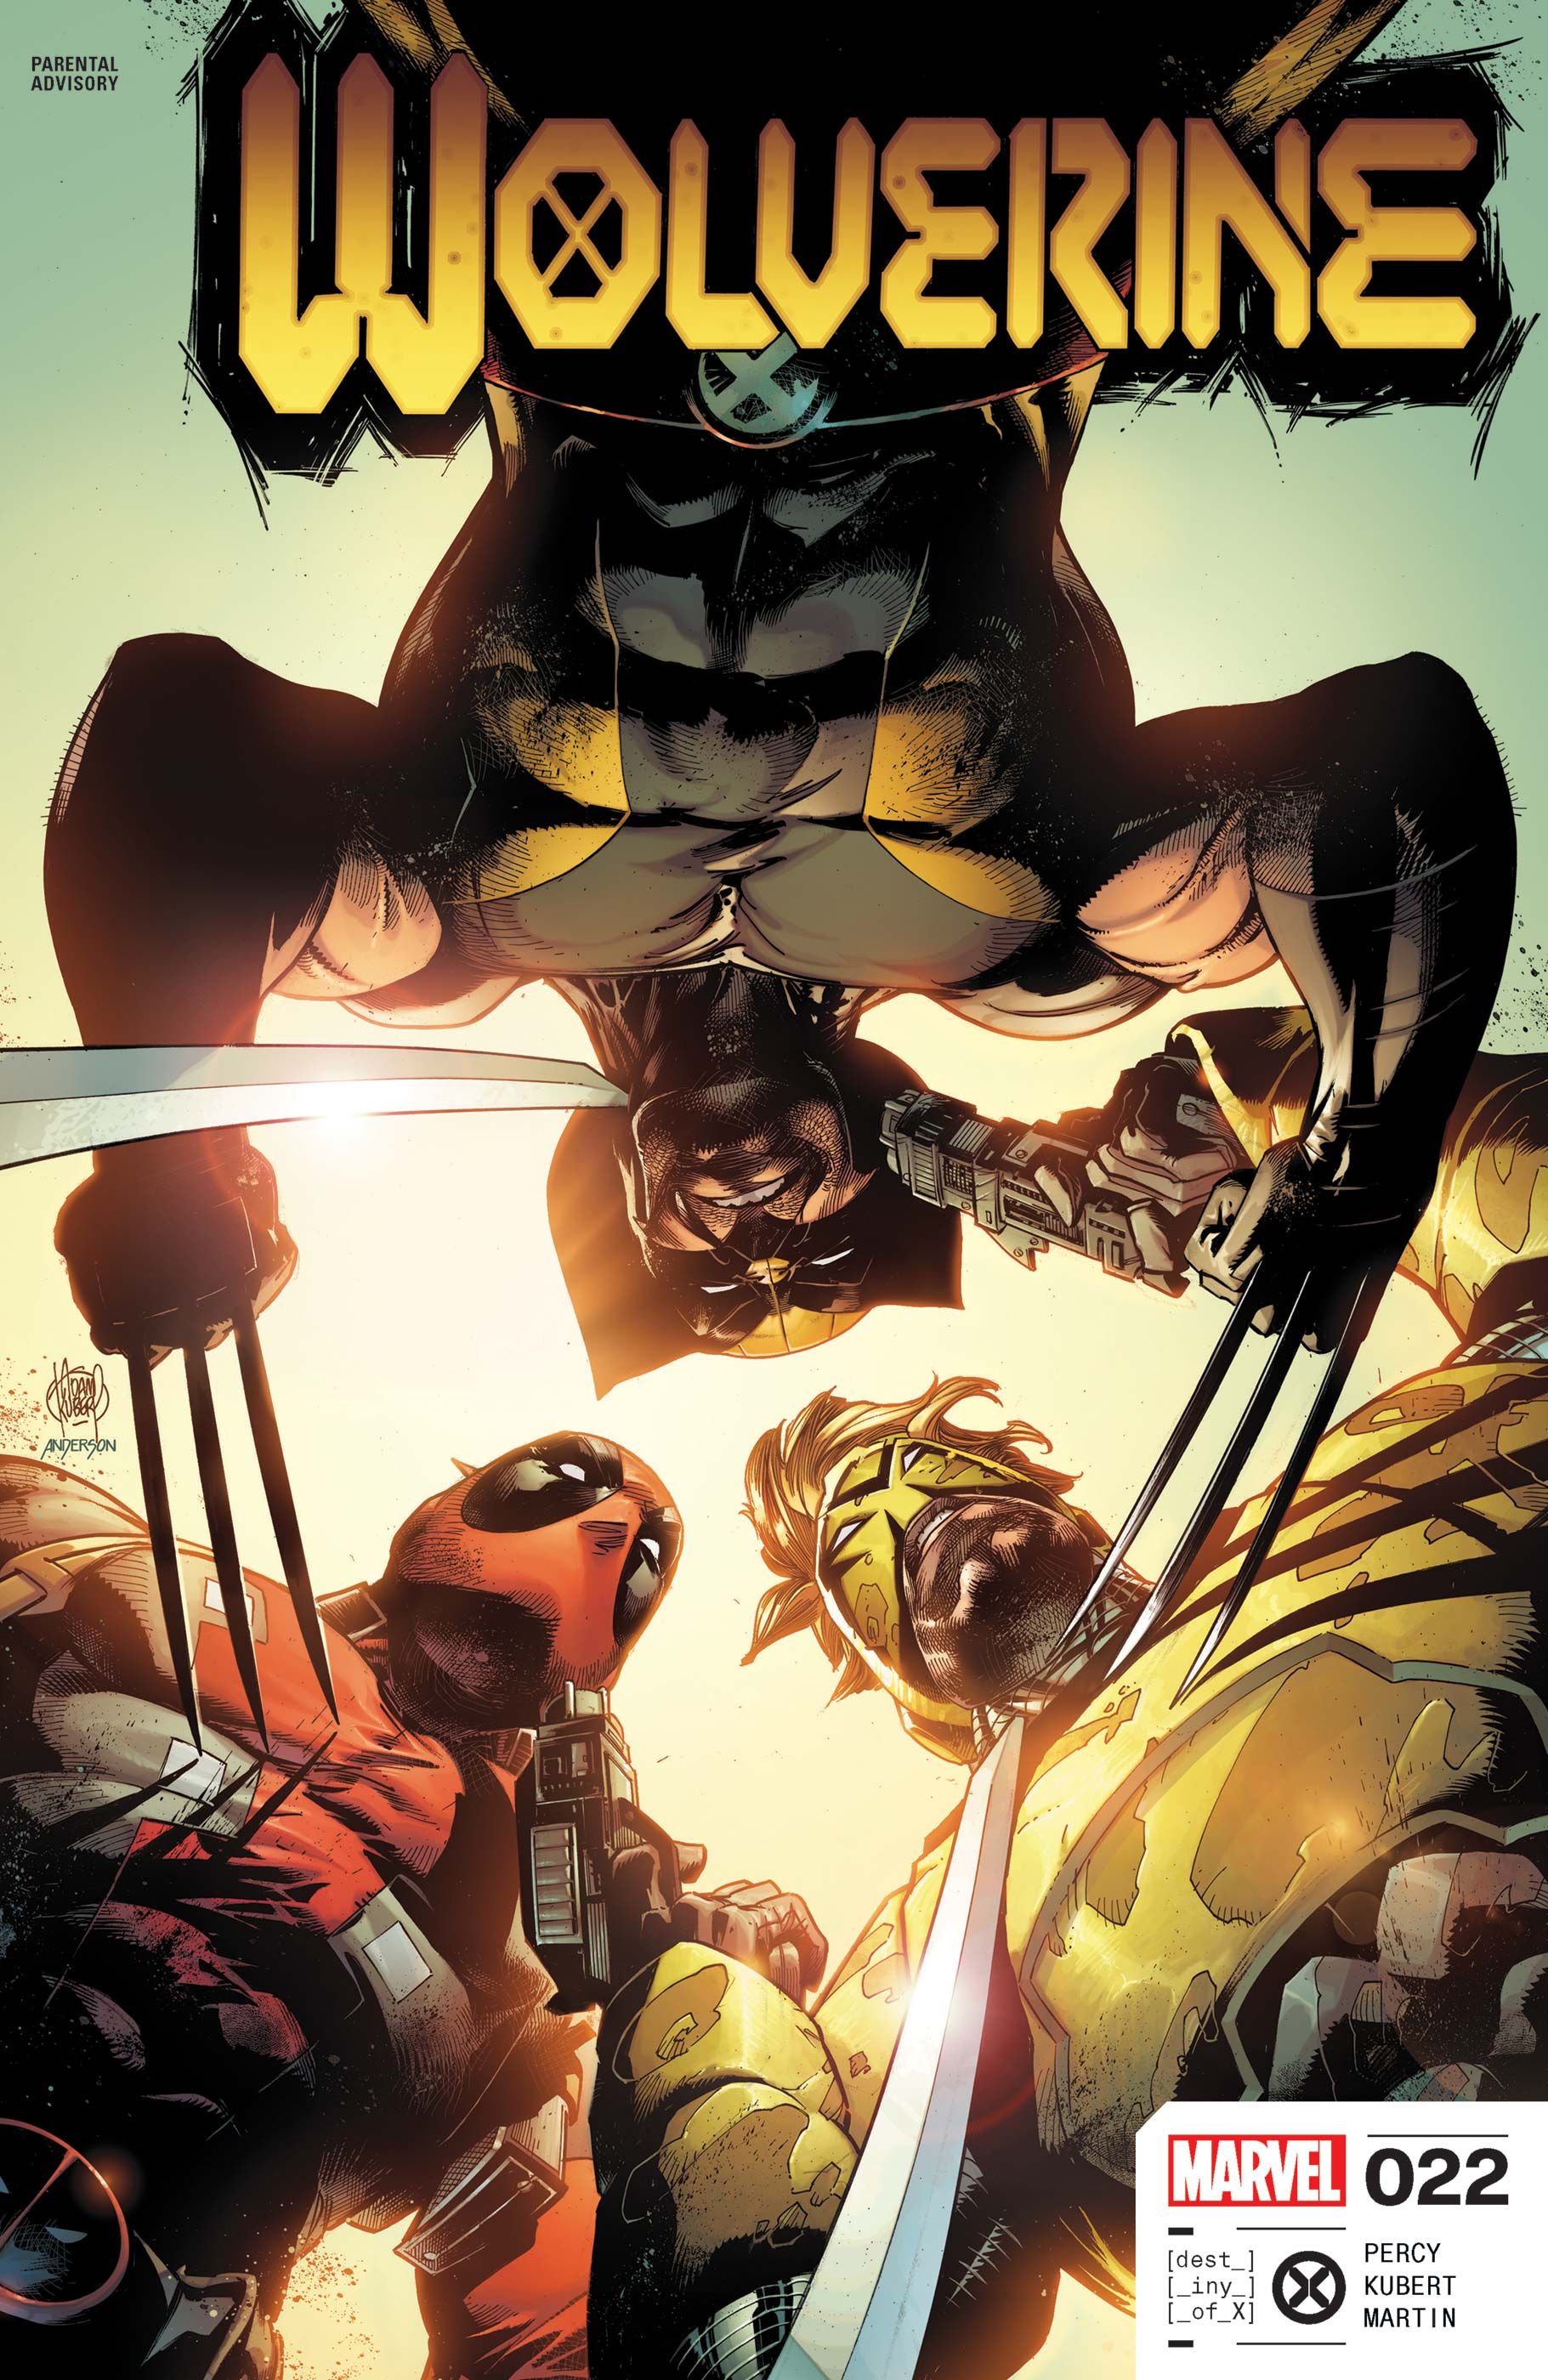 Wolverine, Deadpool and Maverick squaring off